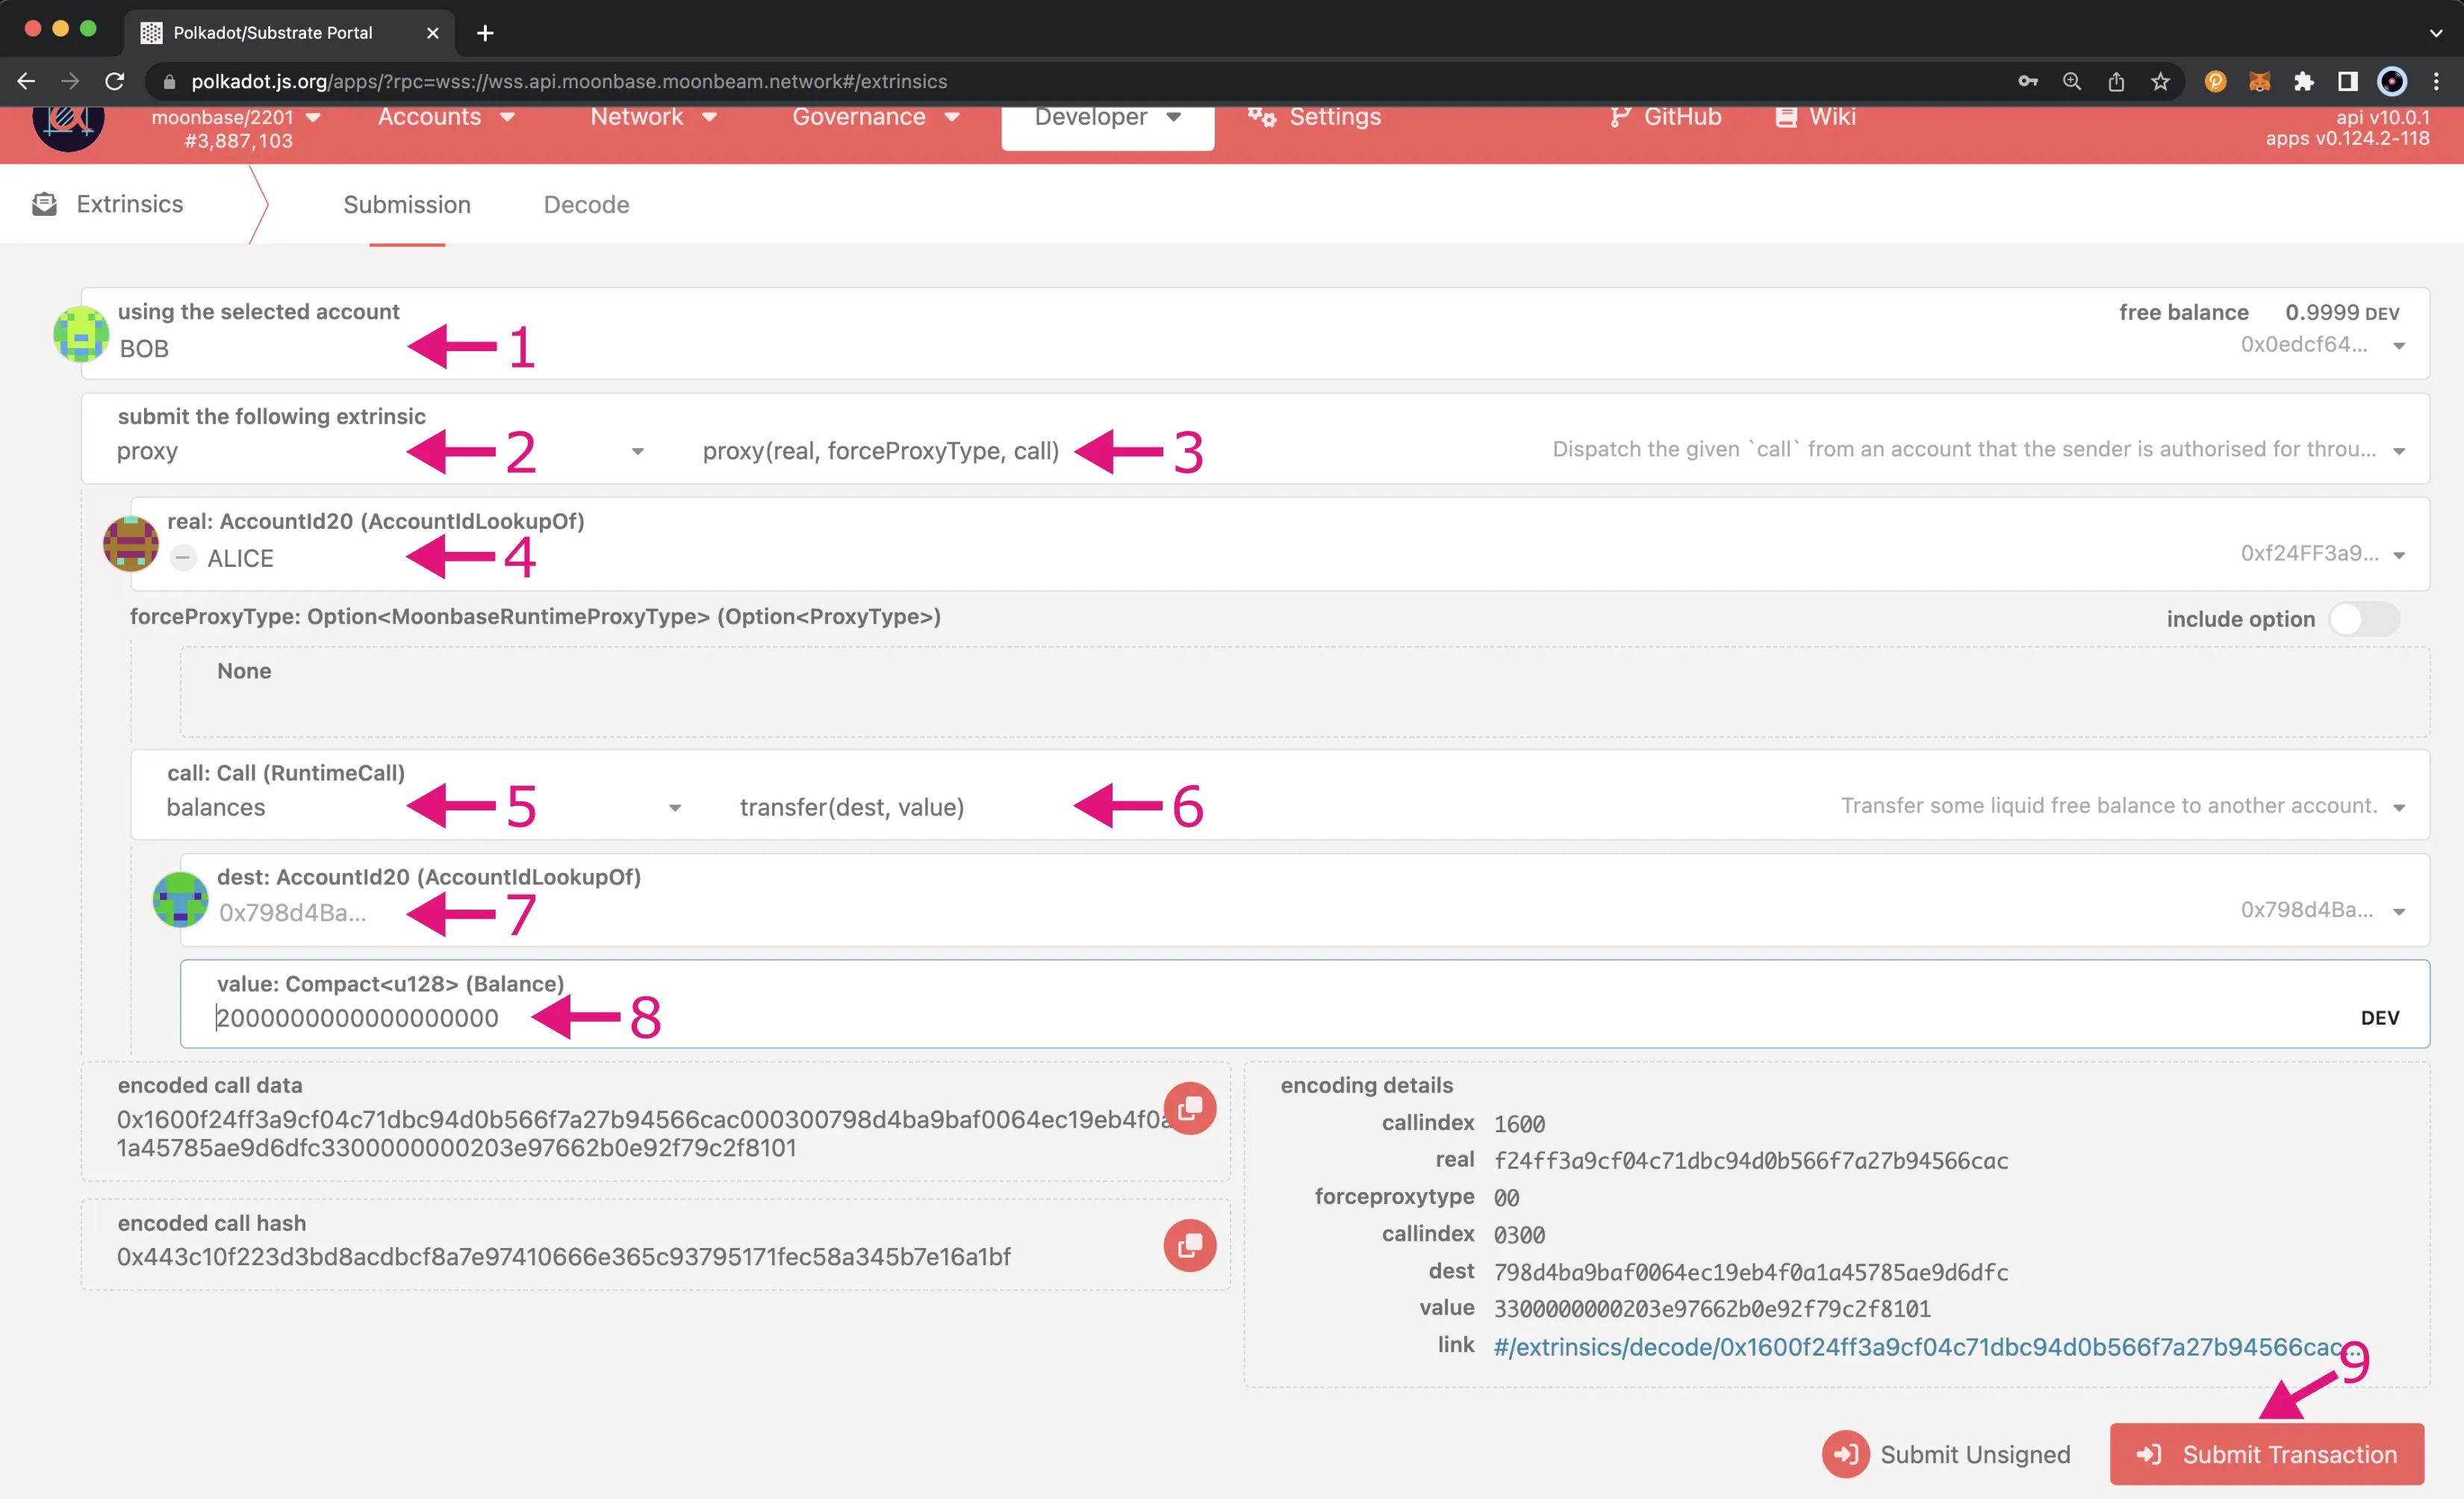 Execute a proxy transaction from the Extrinsics page of Polkadot.js Apps.